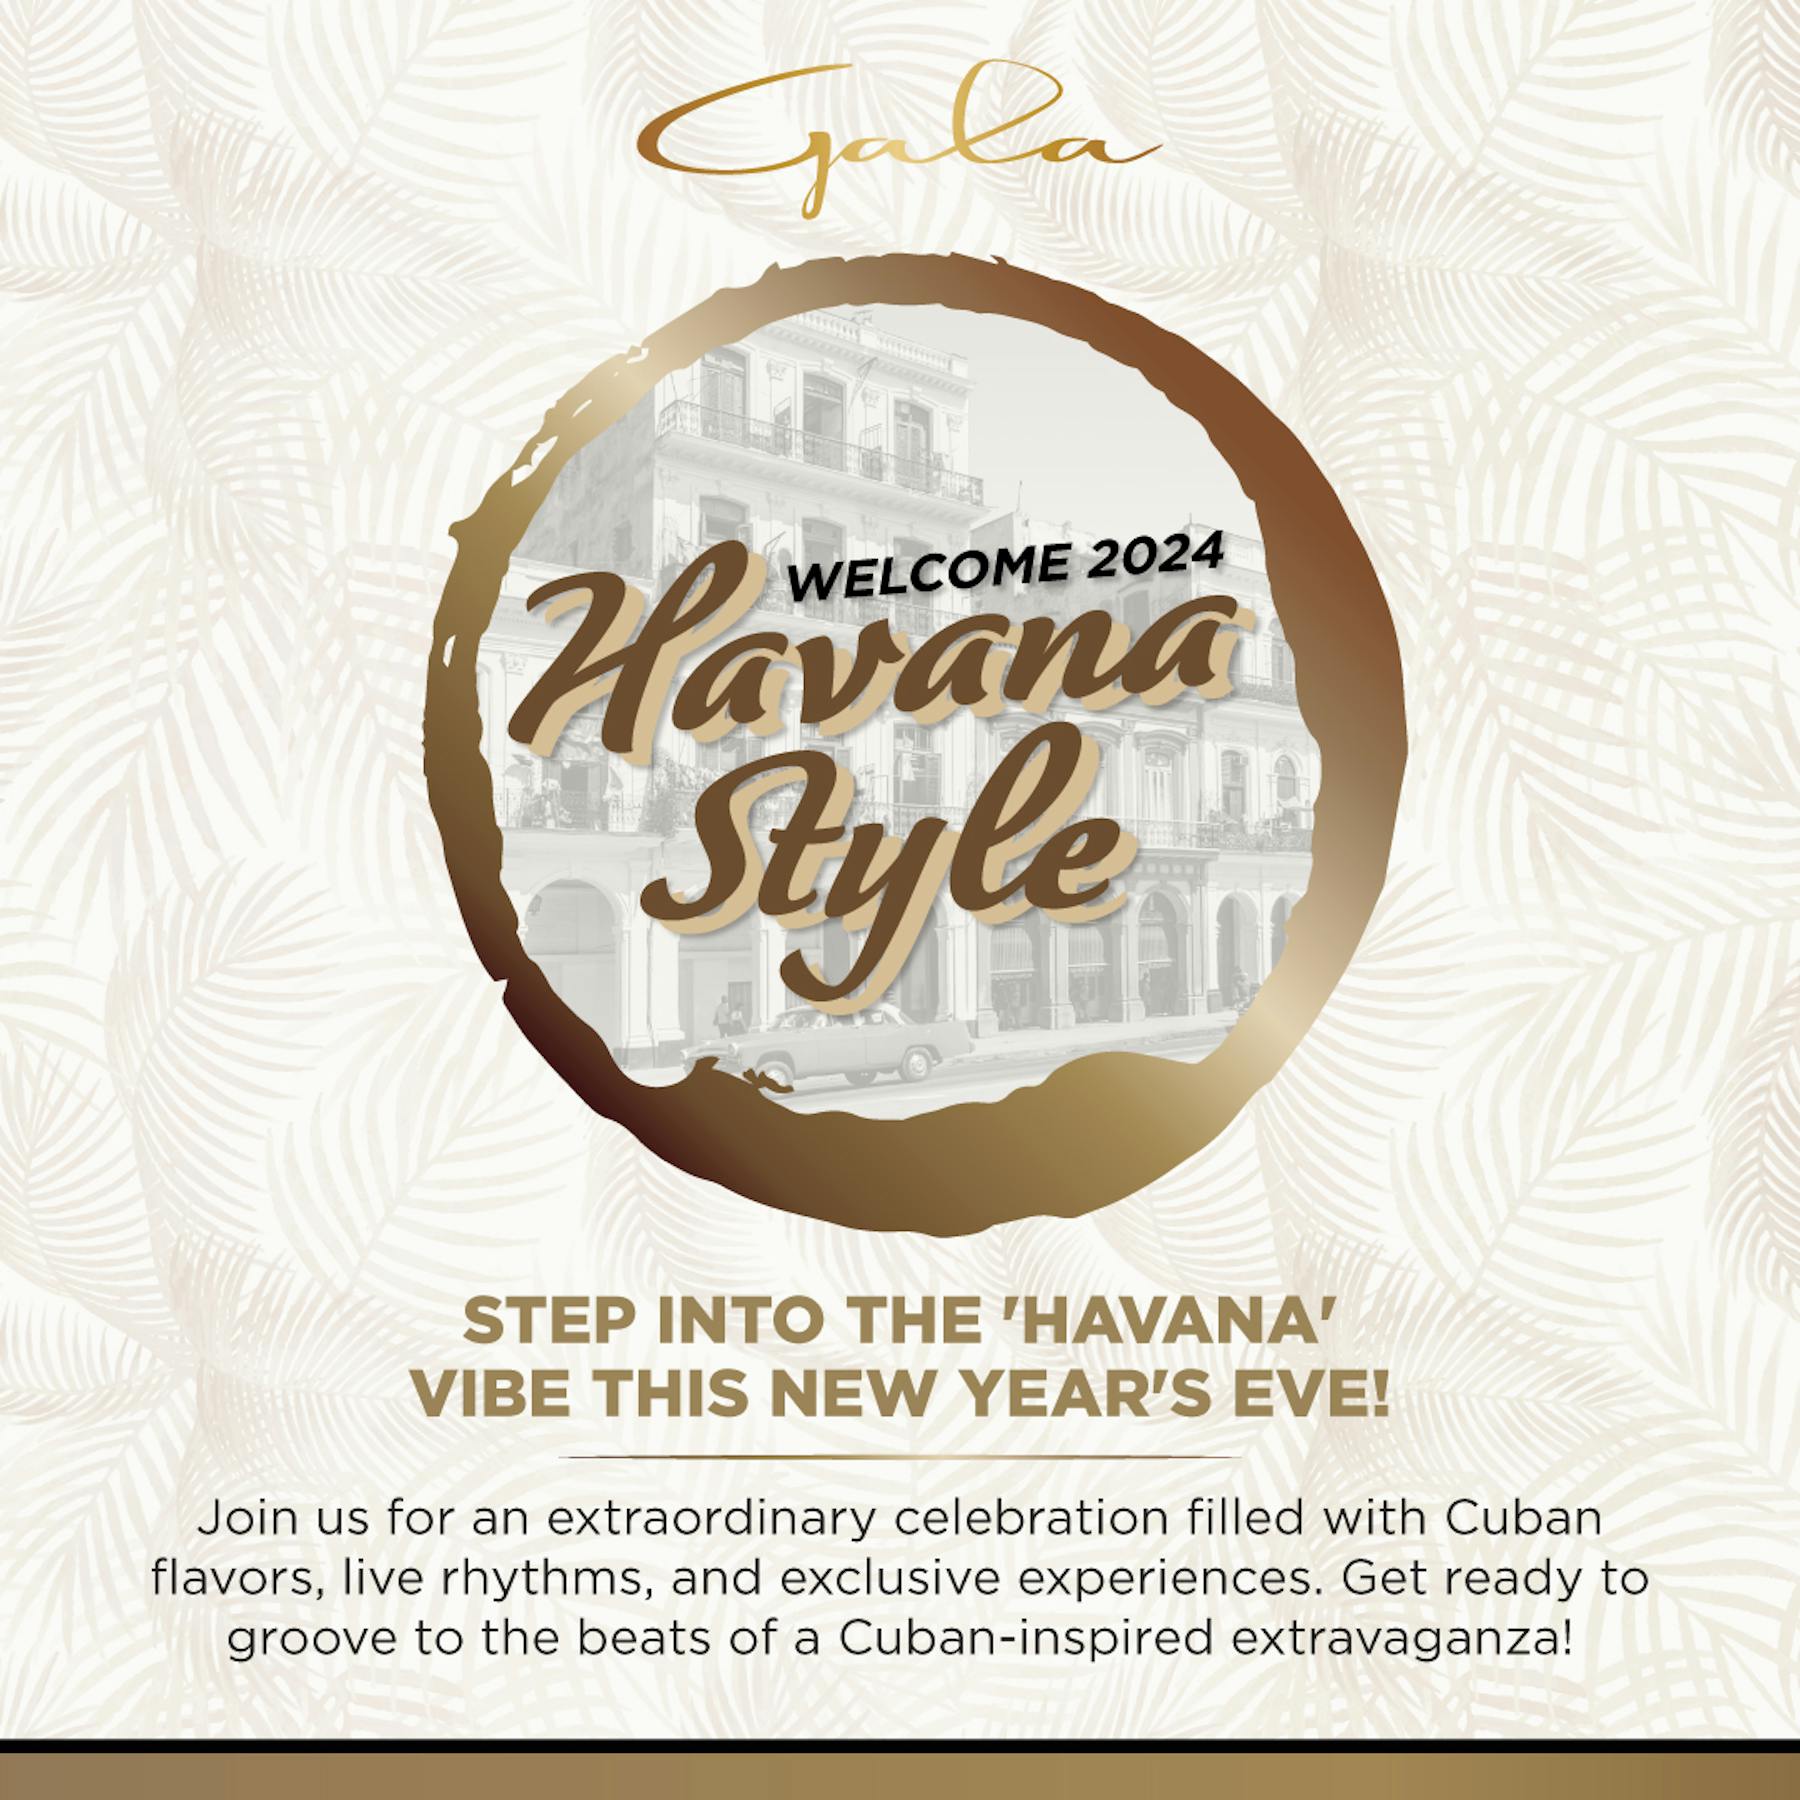 Gala Miami Guest List & Table Bookings